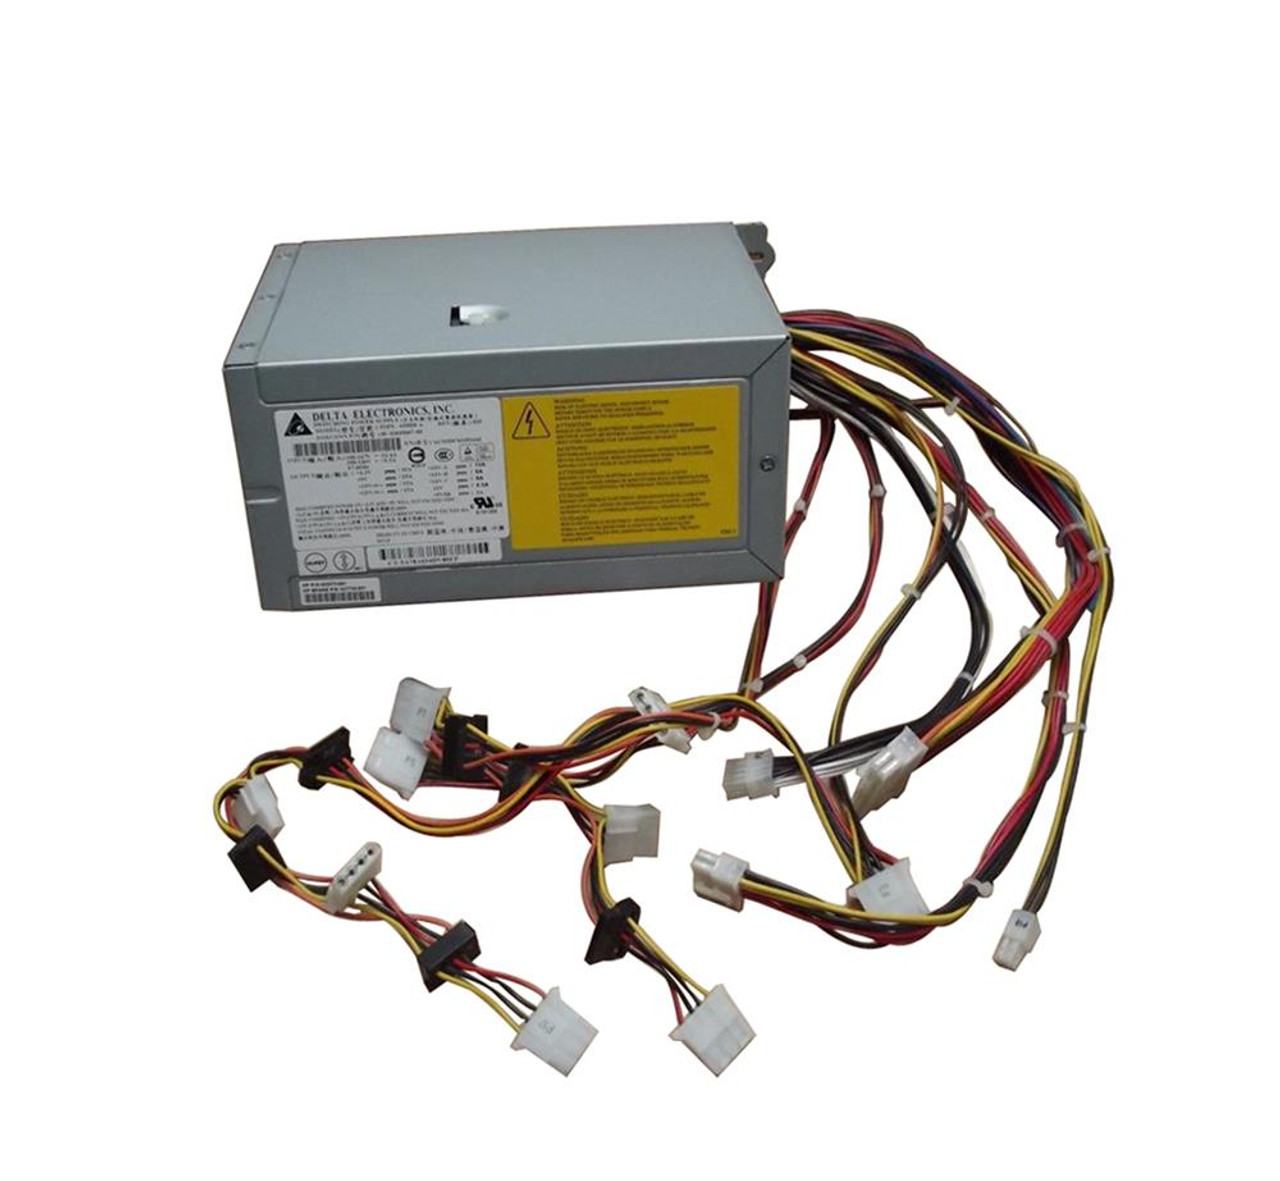 TDPS-650BB-A HP 650-Watts Power Supply for ProLiant ML150 G3 Server